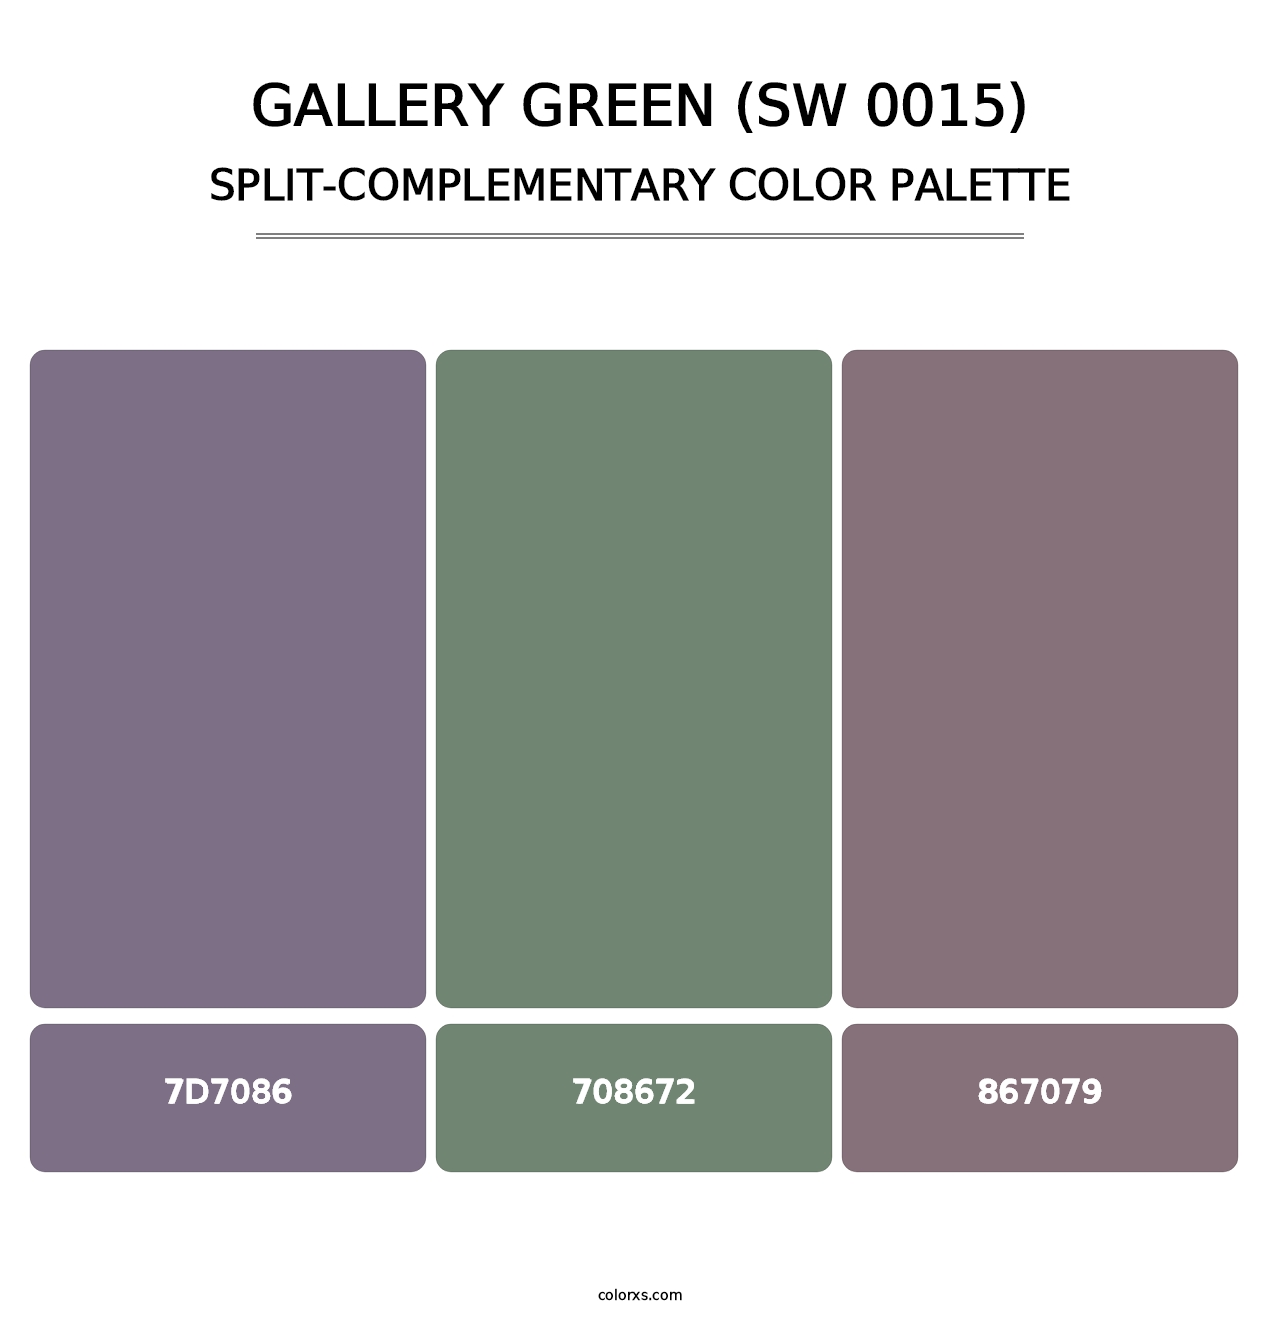 Gallery Green (SW 0015) - Split-Complementary Color Palette